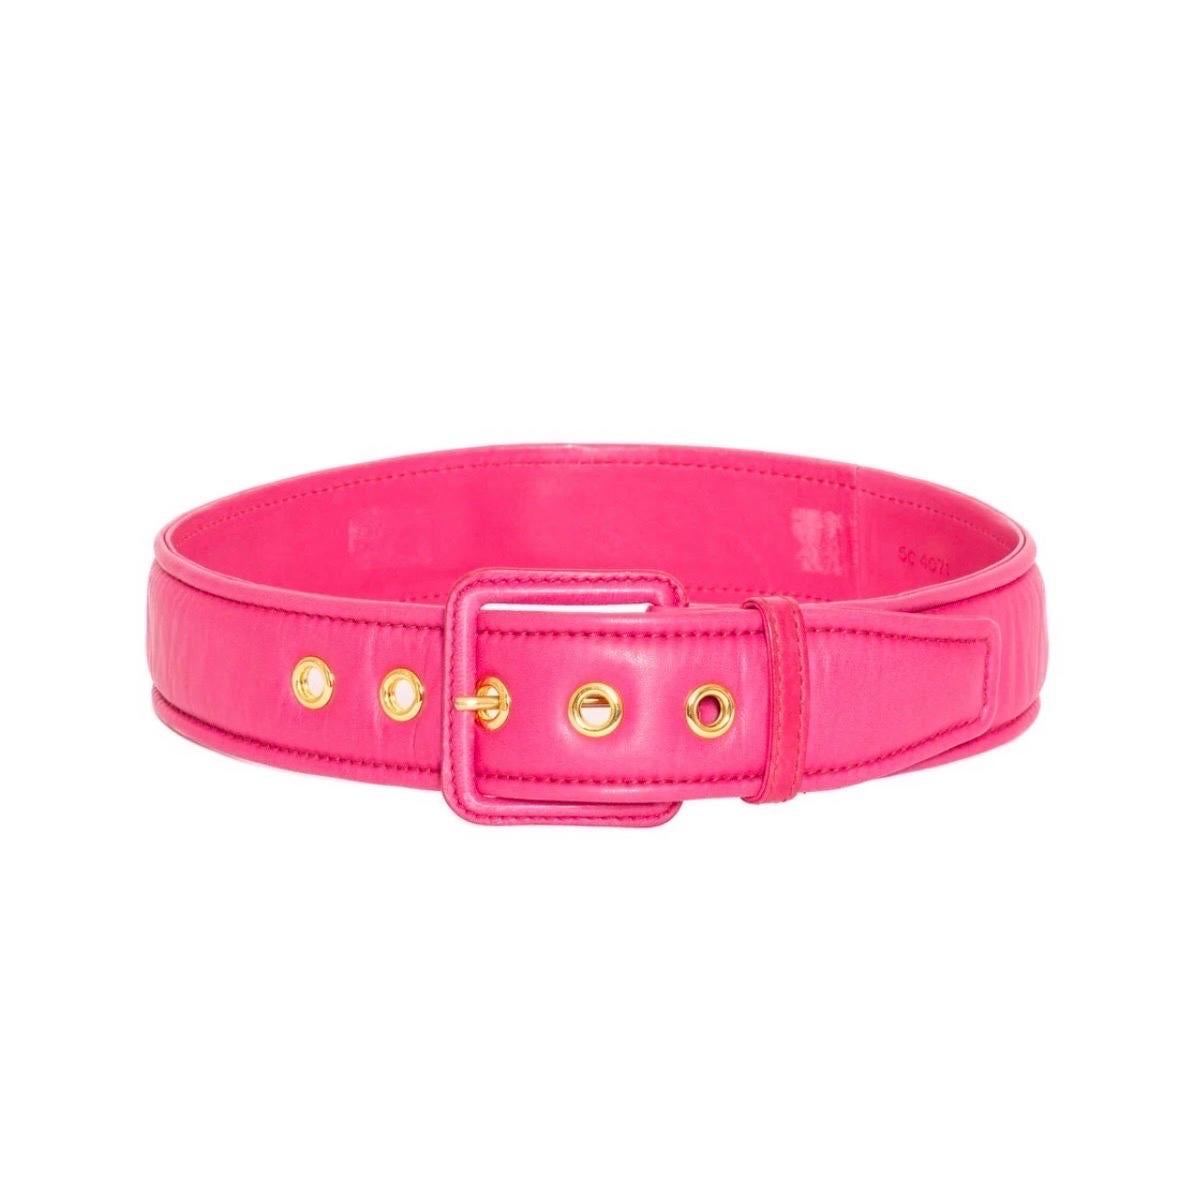 Miu Miu Pink Leather Padded Belt In Excellent Condition For Sale In Los Angeles, CA